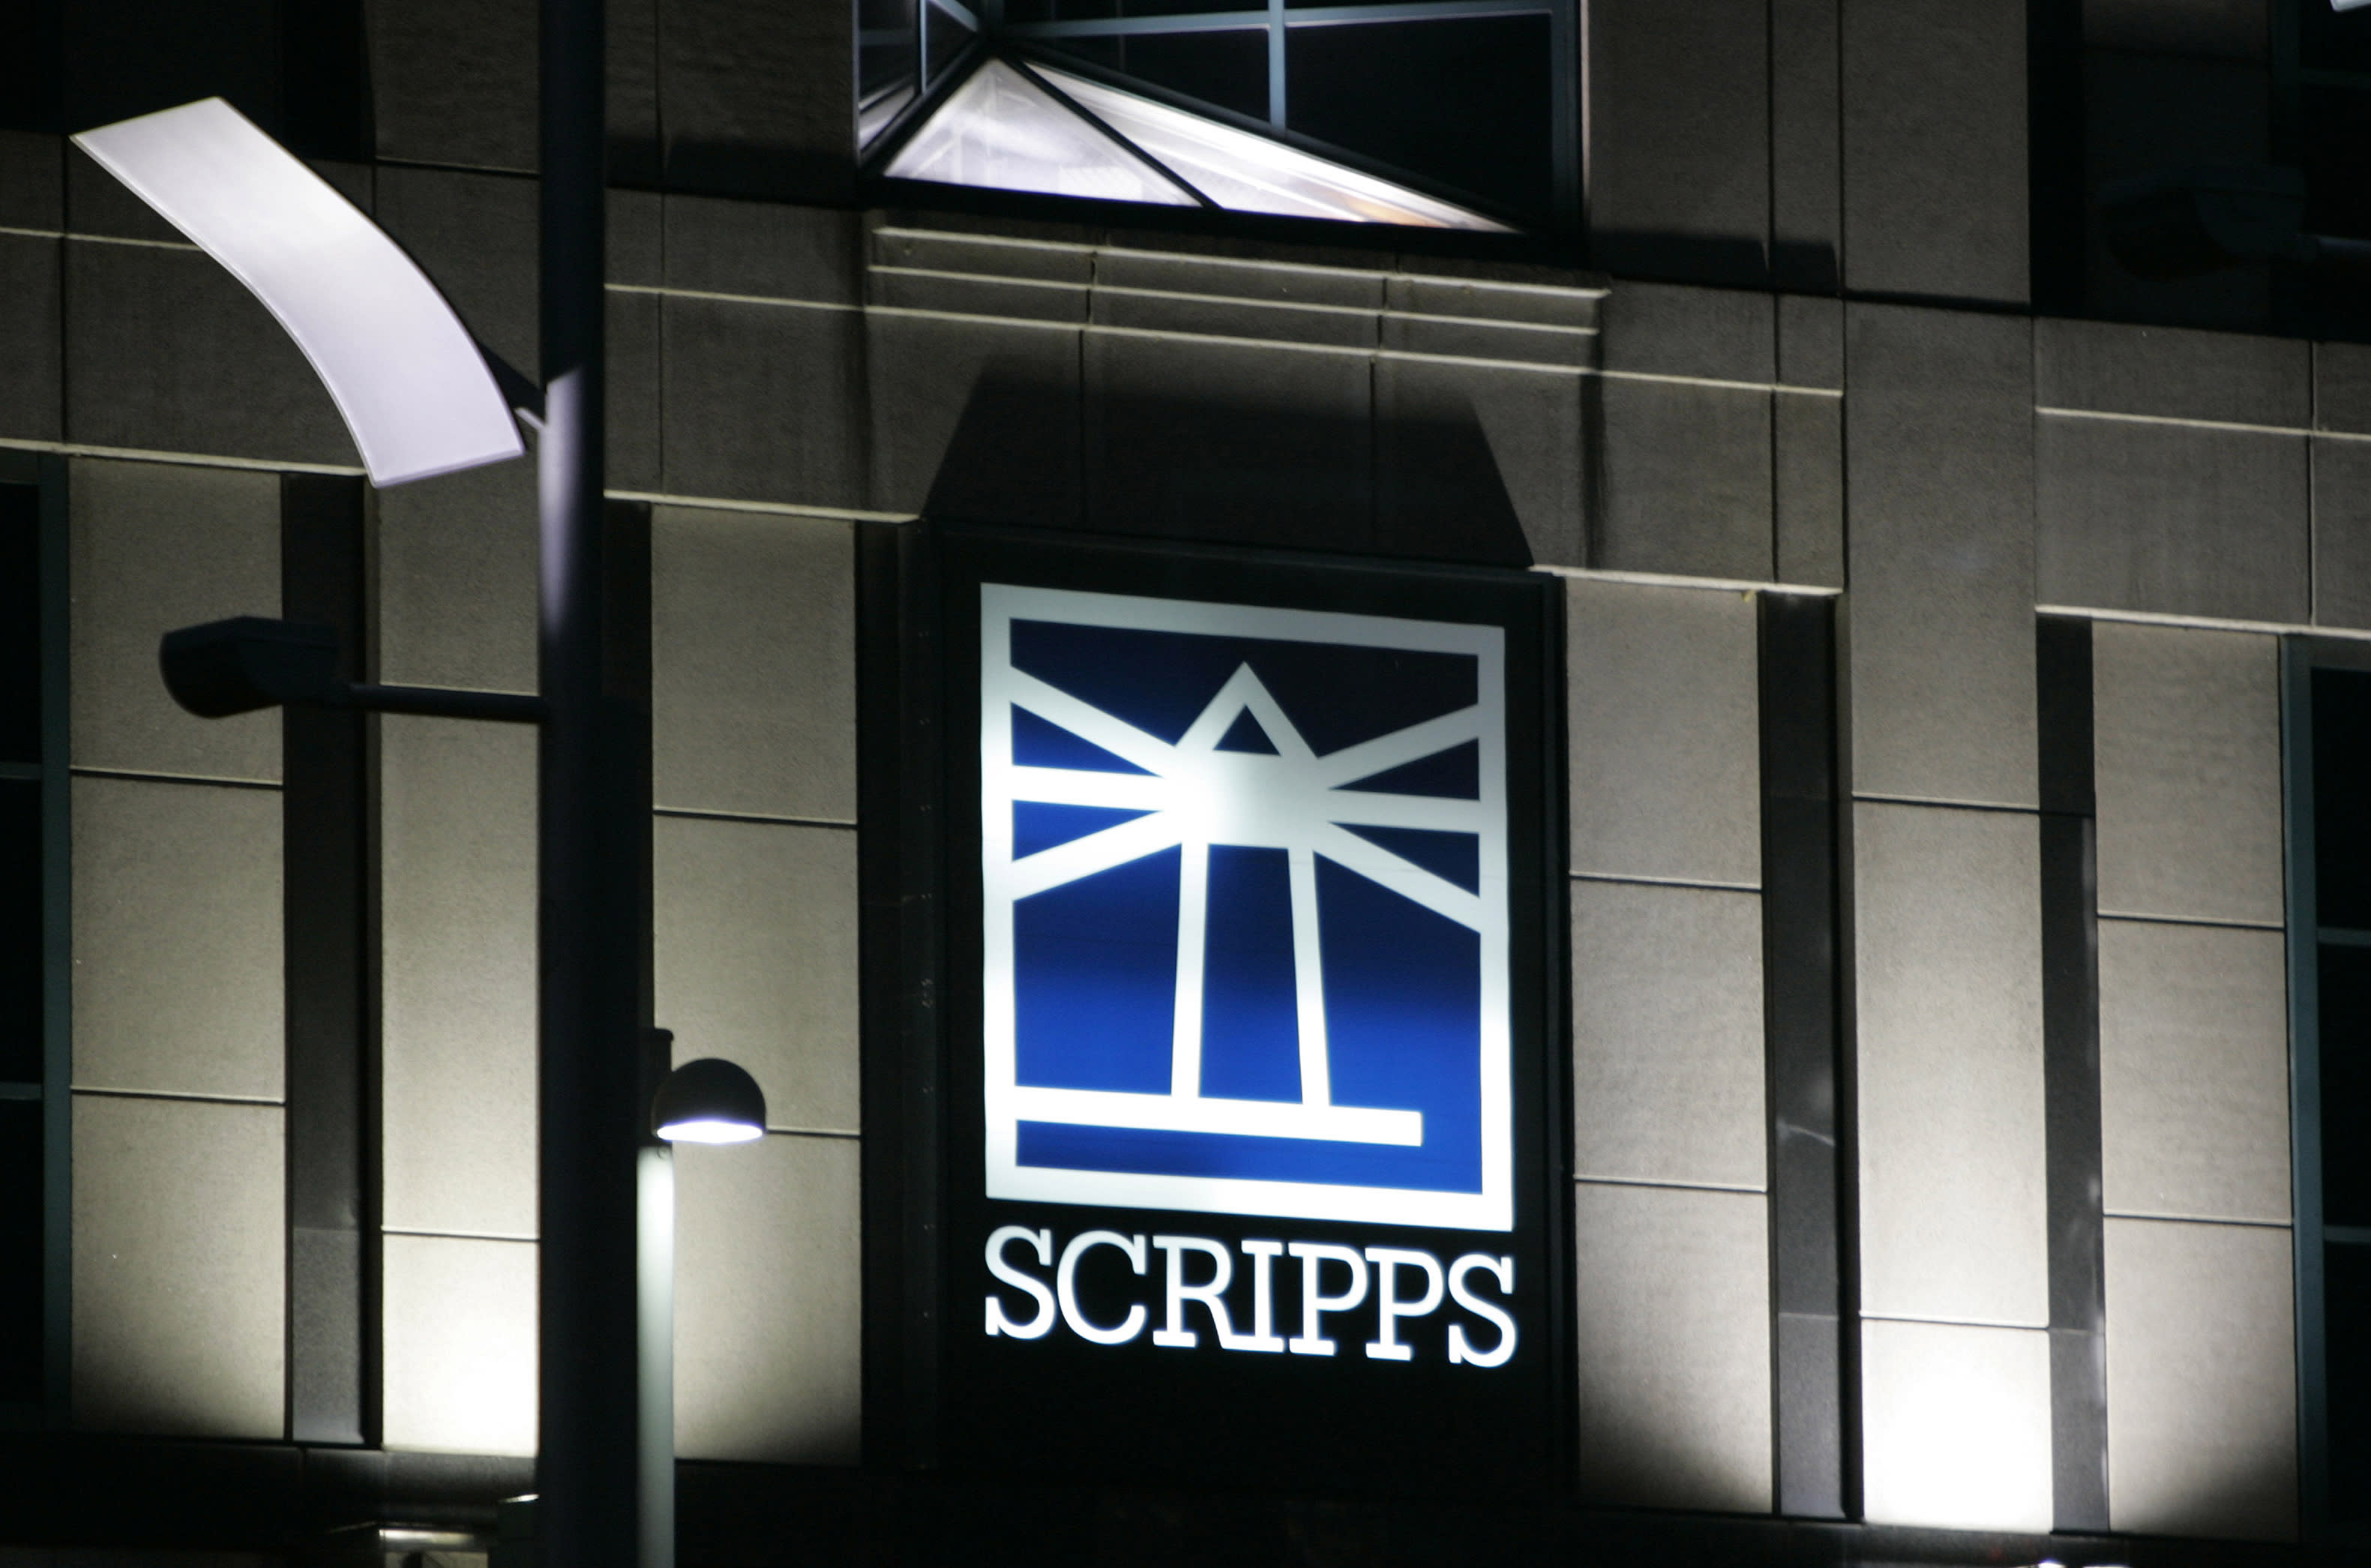 E.W. Scripps Buys ION Media For $2.65B, With Berkshire Hathaway Investment